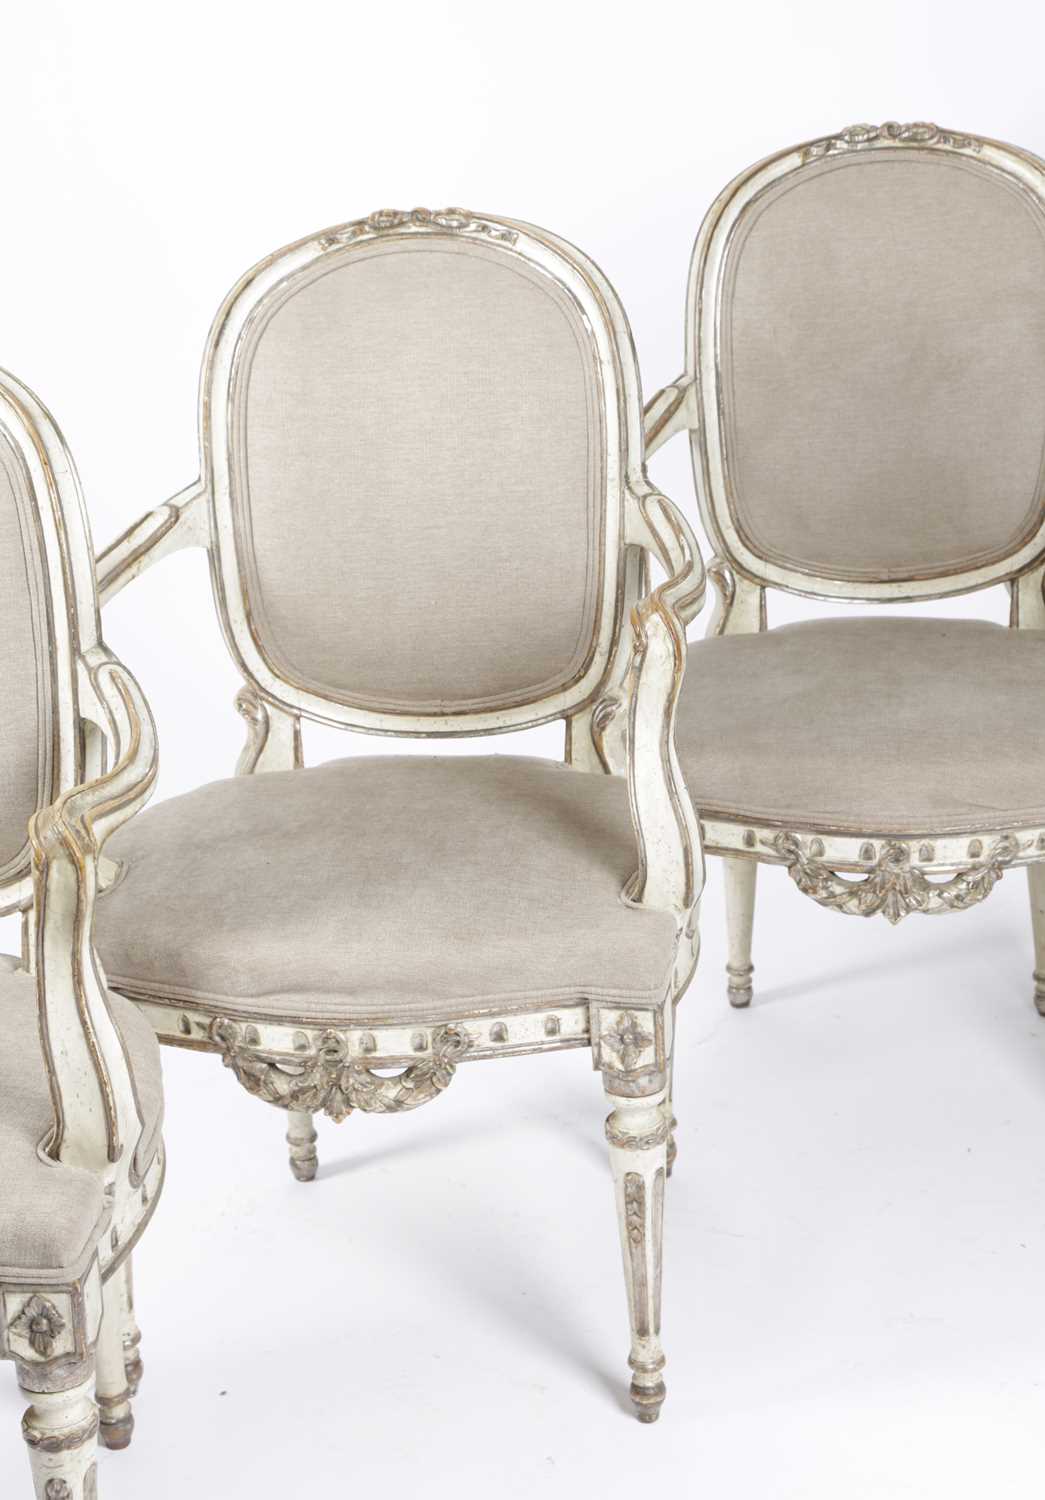 A SET OF FOUR ITALIAN PAINTED AND SILVERED ARMCHAIRS IN 18TH CENTURY STYLE, FLORENTINE, 20TH CENTURY - Image 2 of 2